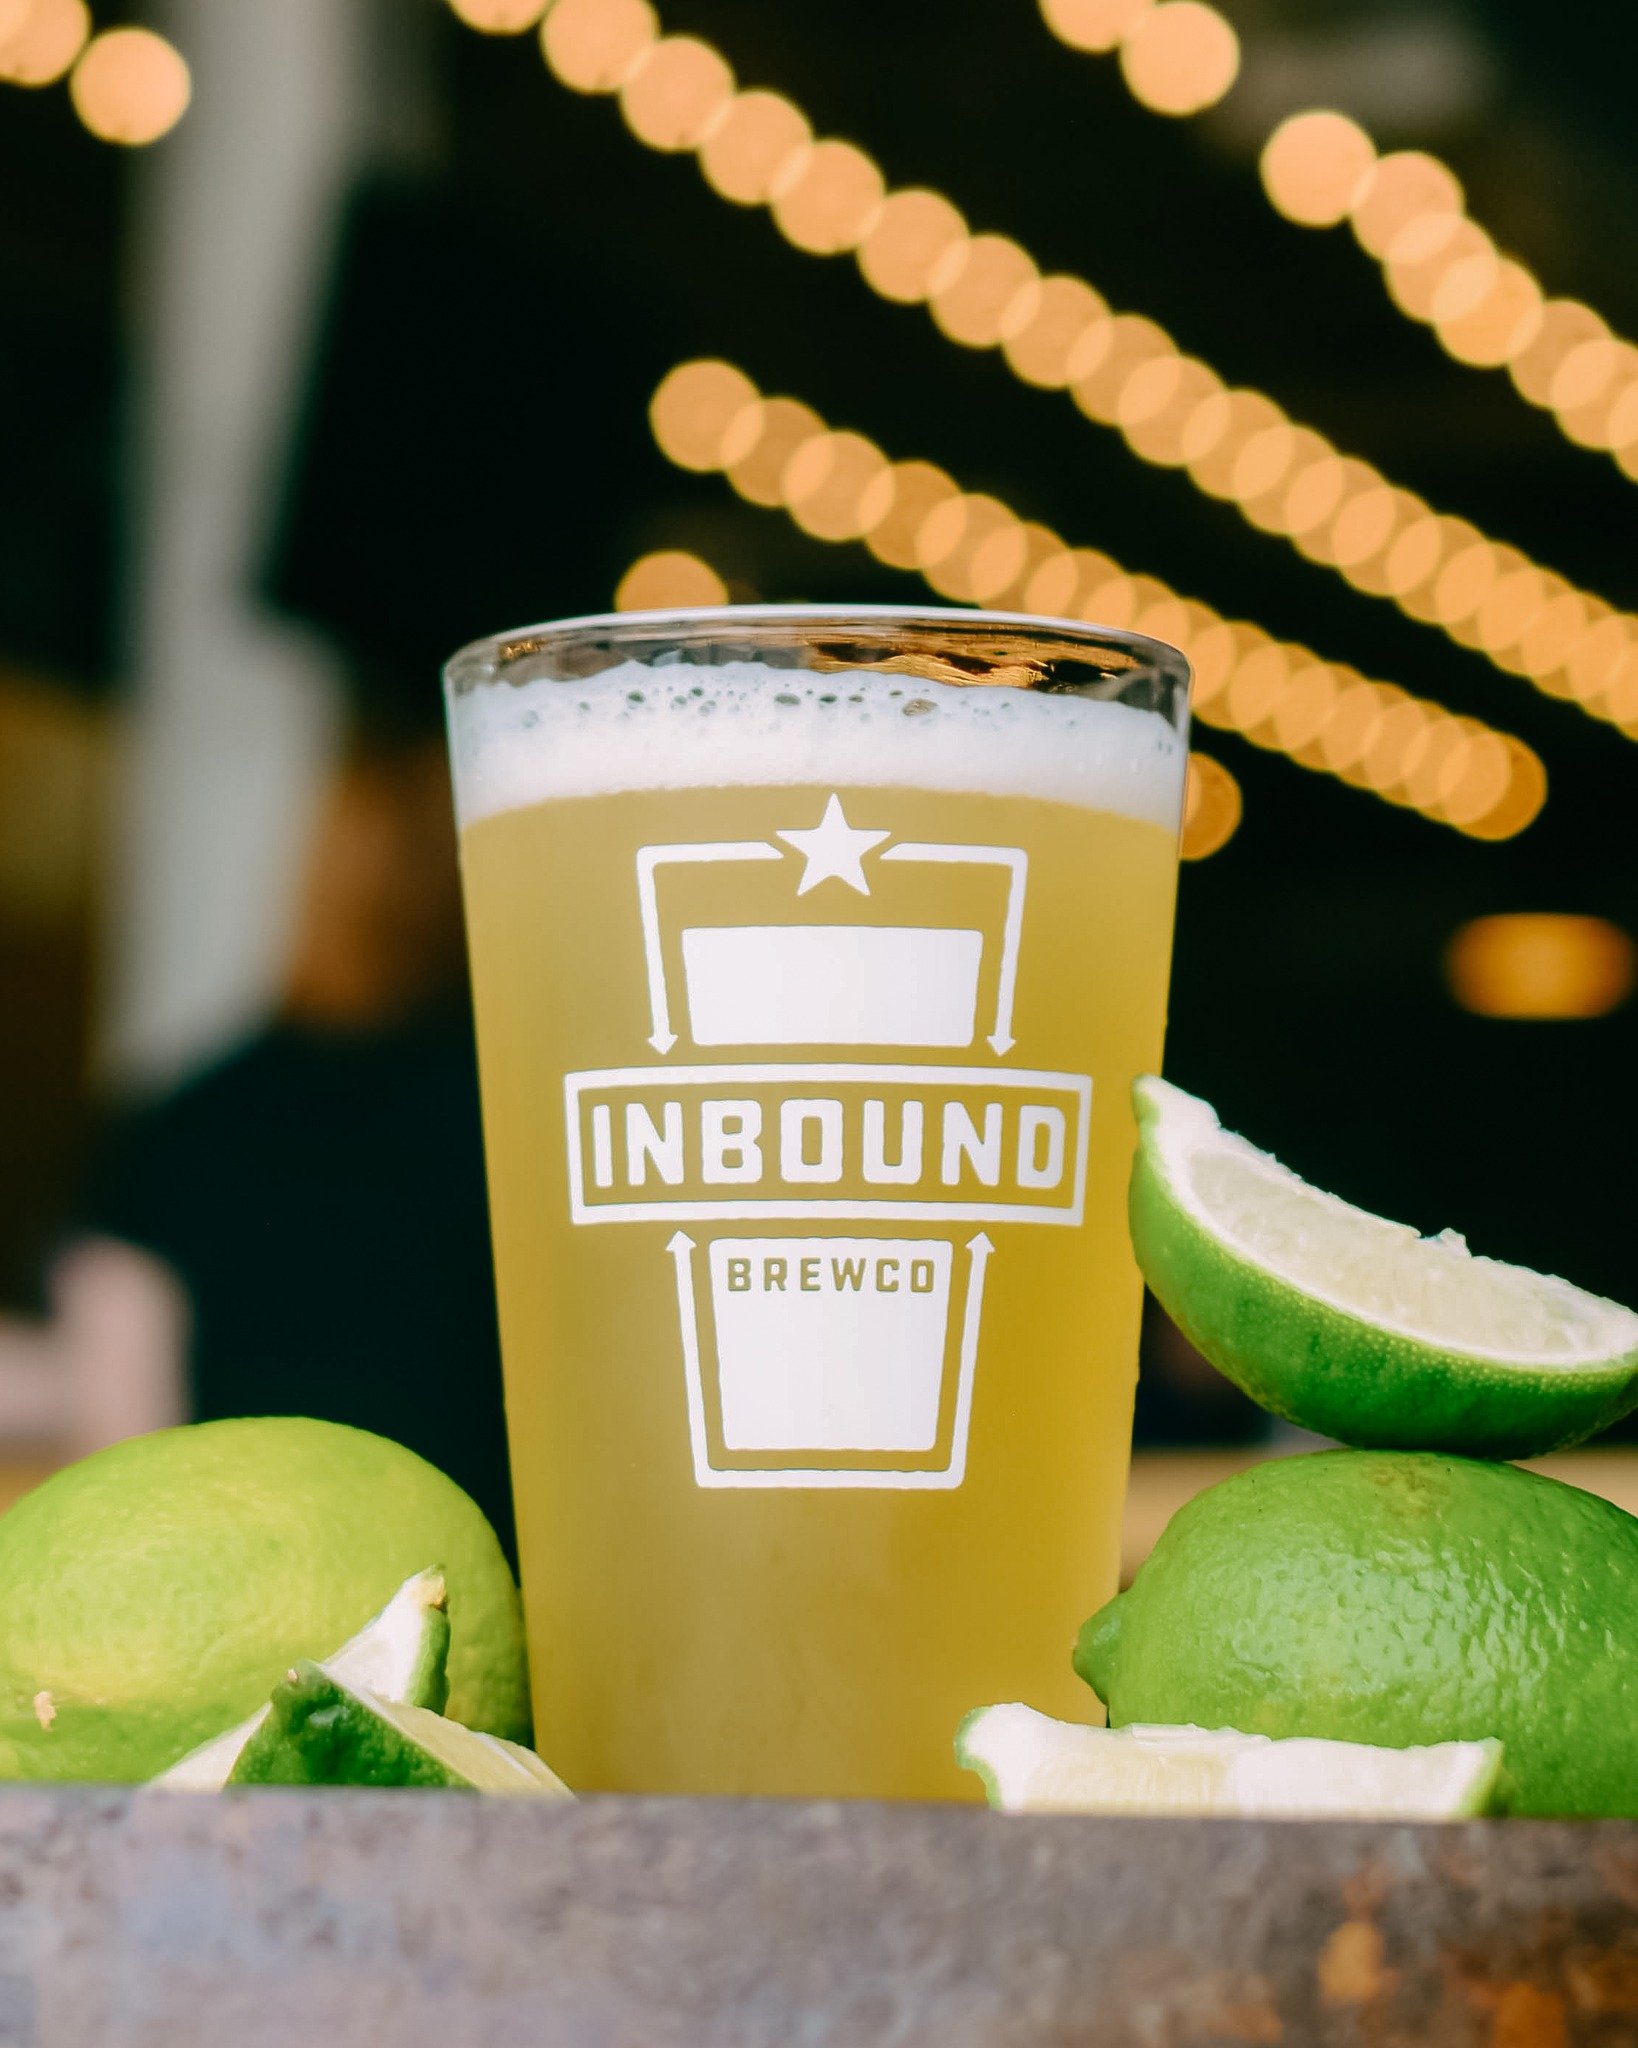 🎉🍻 Celebrate Cinco de Mayo in style this Sunday at Inbound! 🍹 Enjoy $5 pints of our refreshing Laser Loon Lime all day long! We're also offering free icebergs on any beer, giving it that perfect margarita feel. 🤩

Cheers to a fiesta-filled Sunday